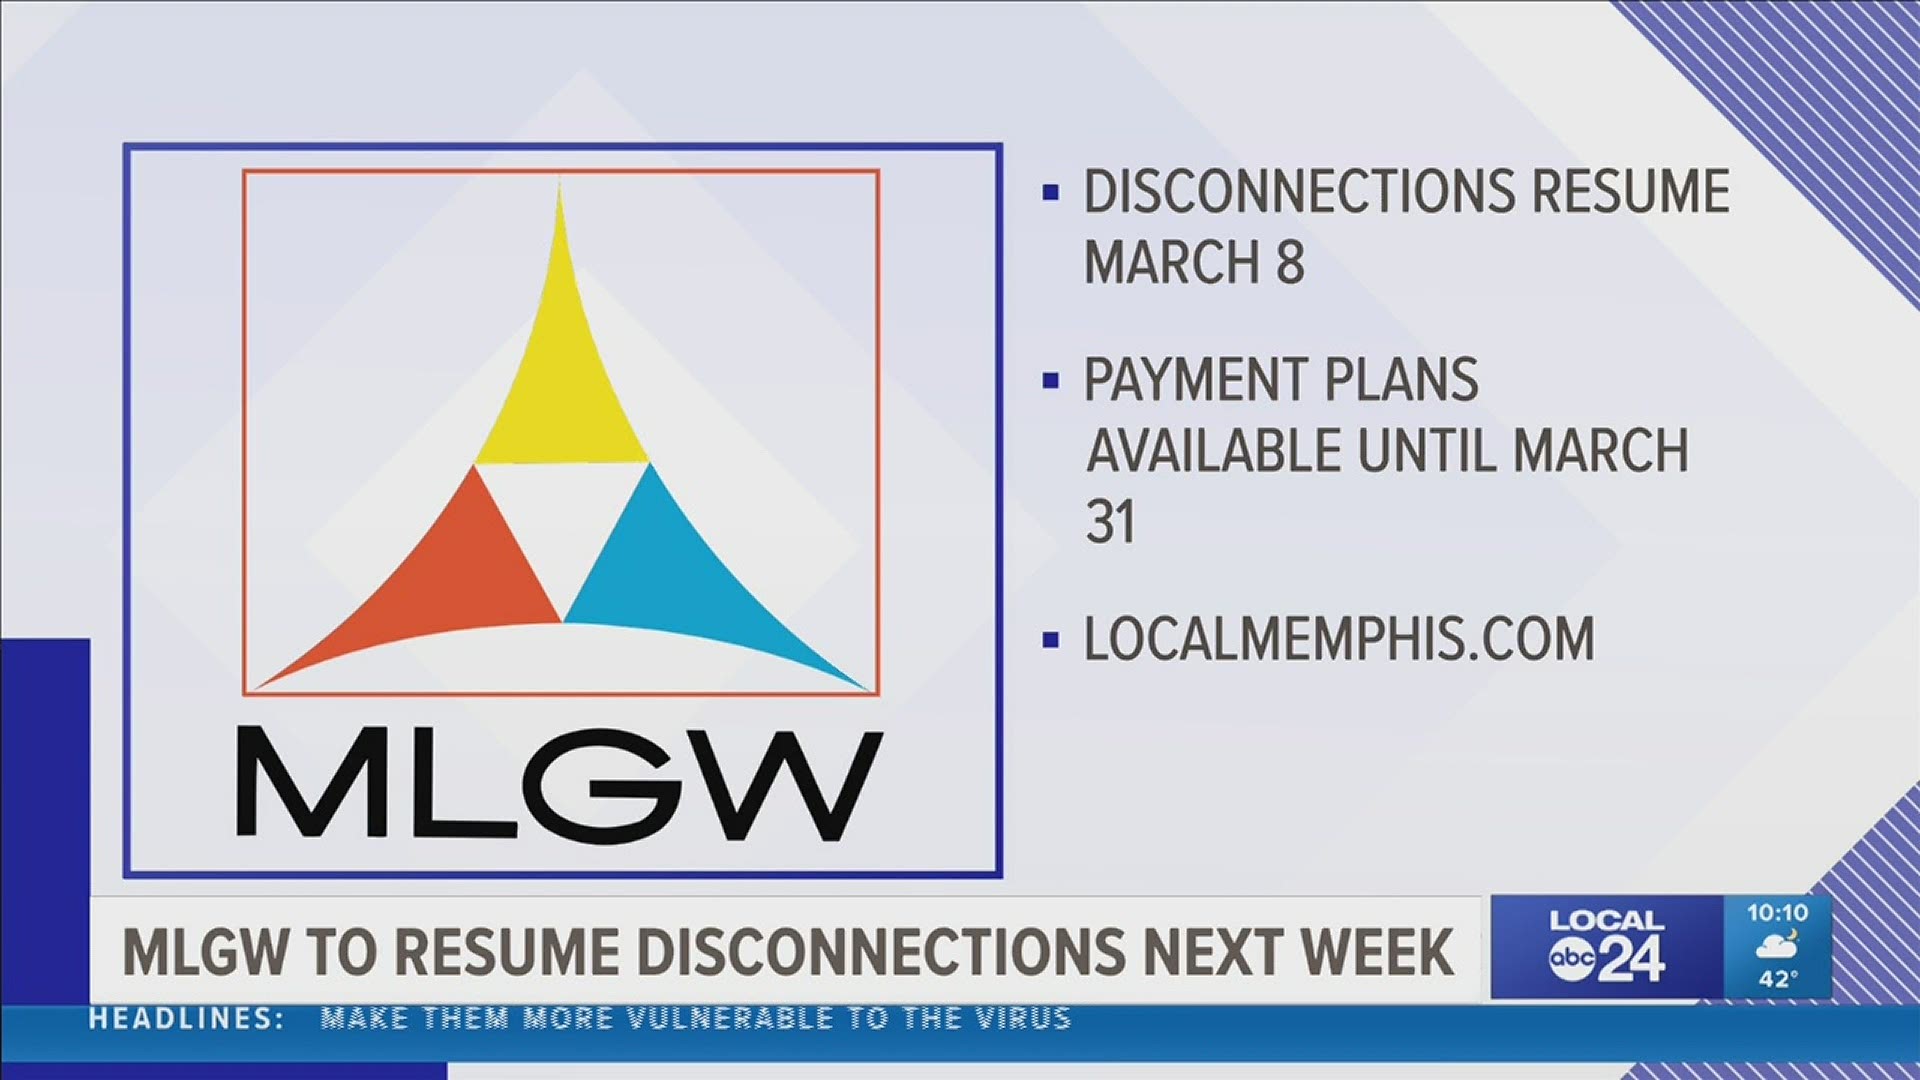 MLGW made the announcement March 1 to resume disconnections for non-payment